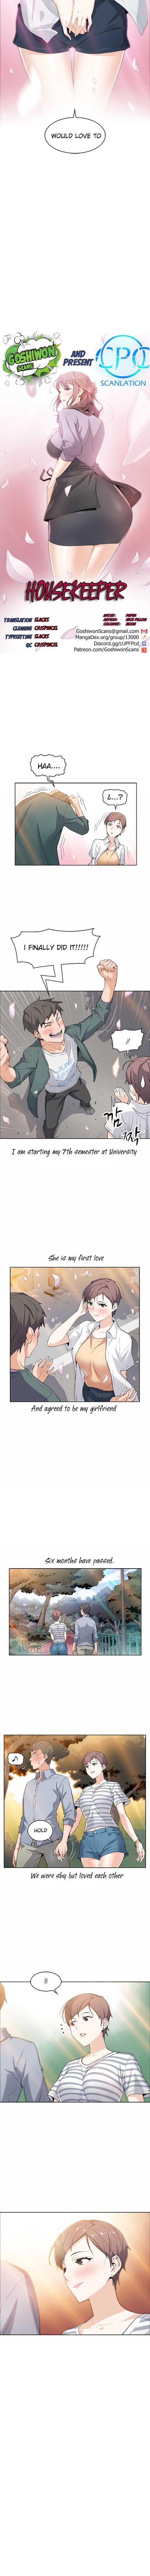 Masturbate Housekeeper [Neck Pillow, Paper] Ch.49/49 [English] [Manhwa PDF] Completed Blowjob Contest - Page 3